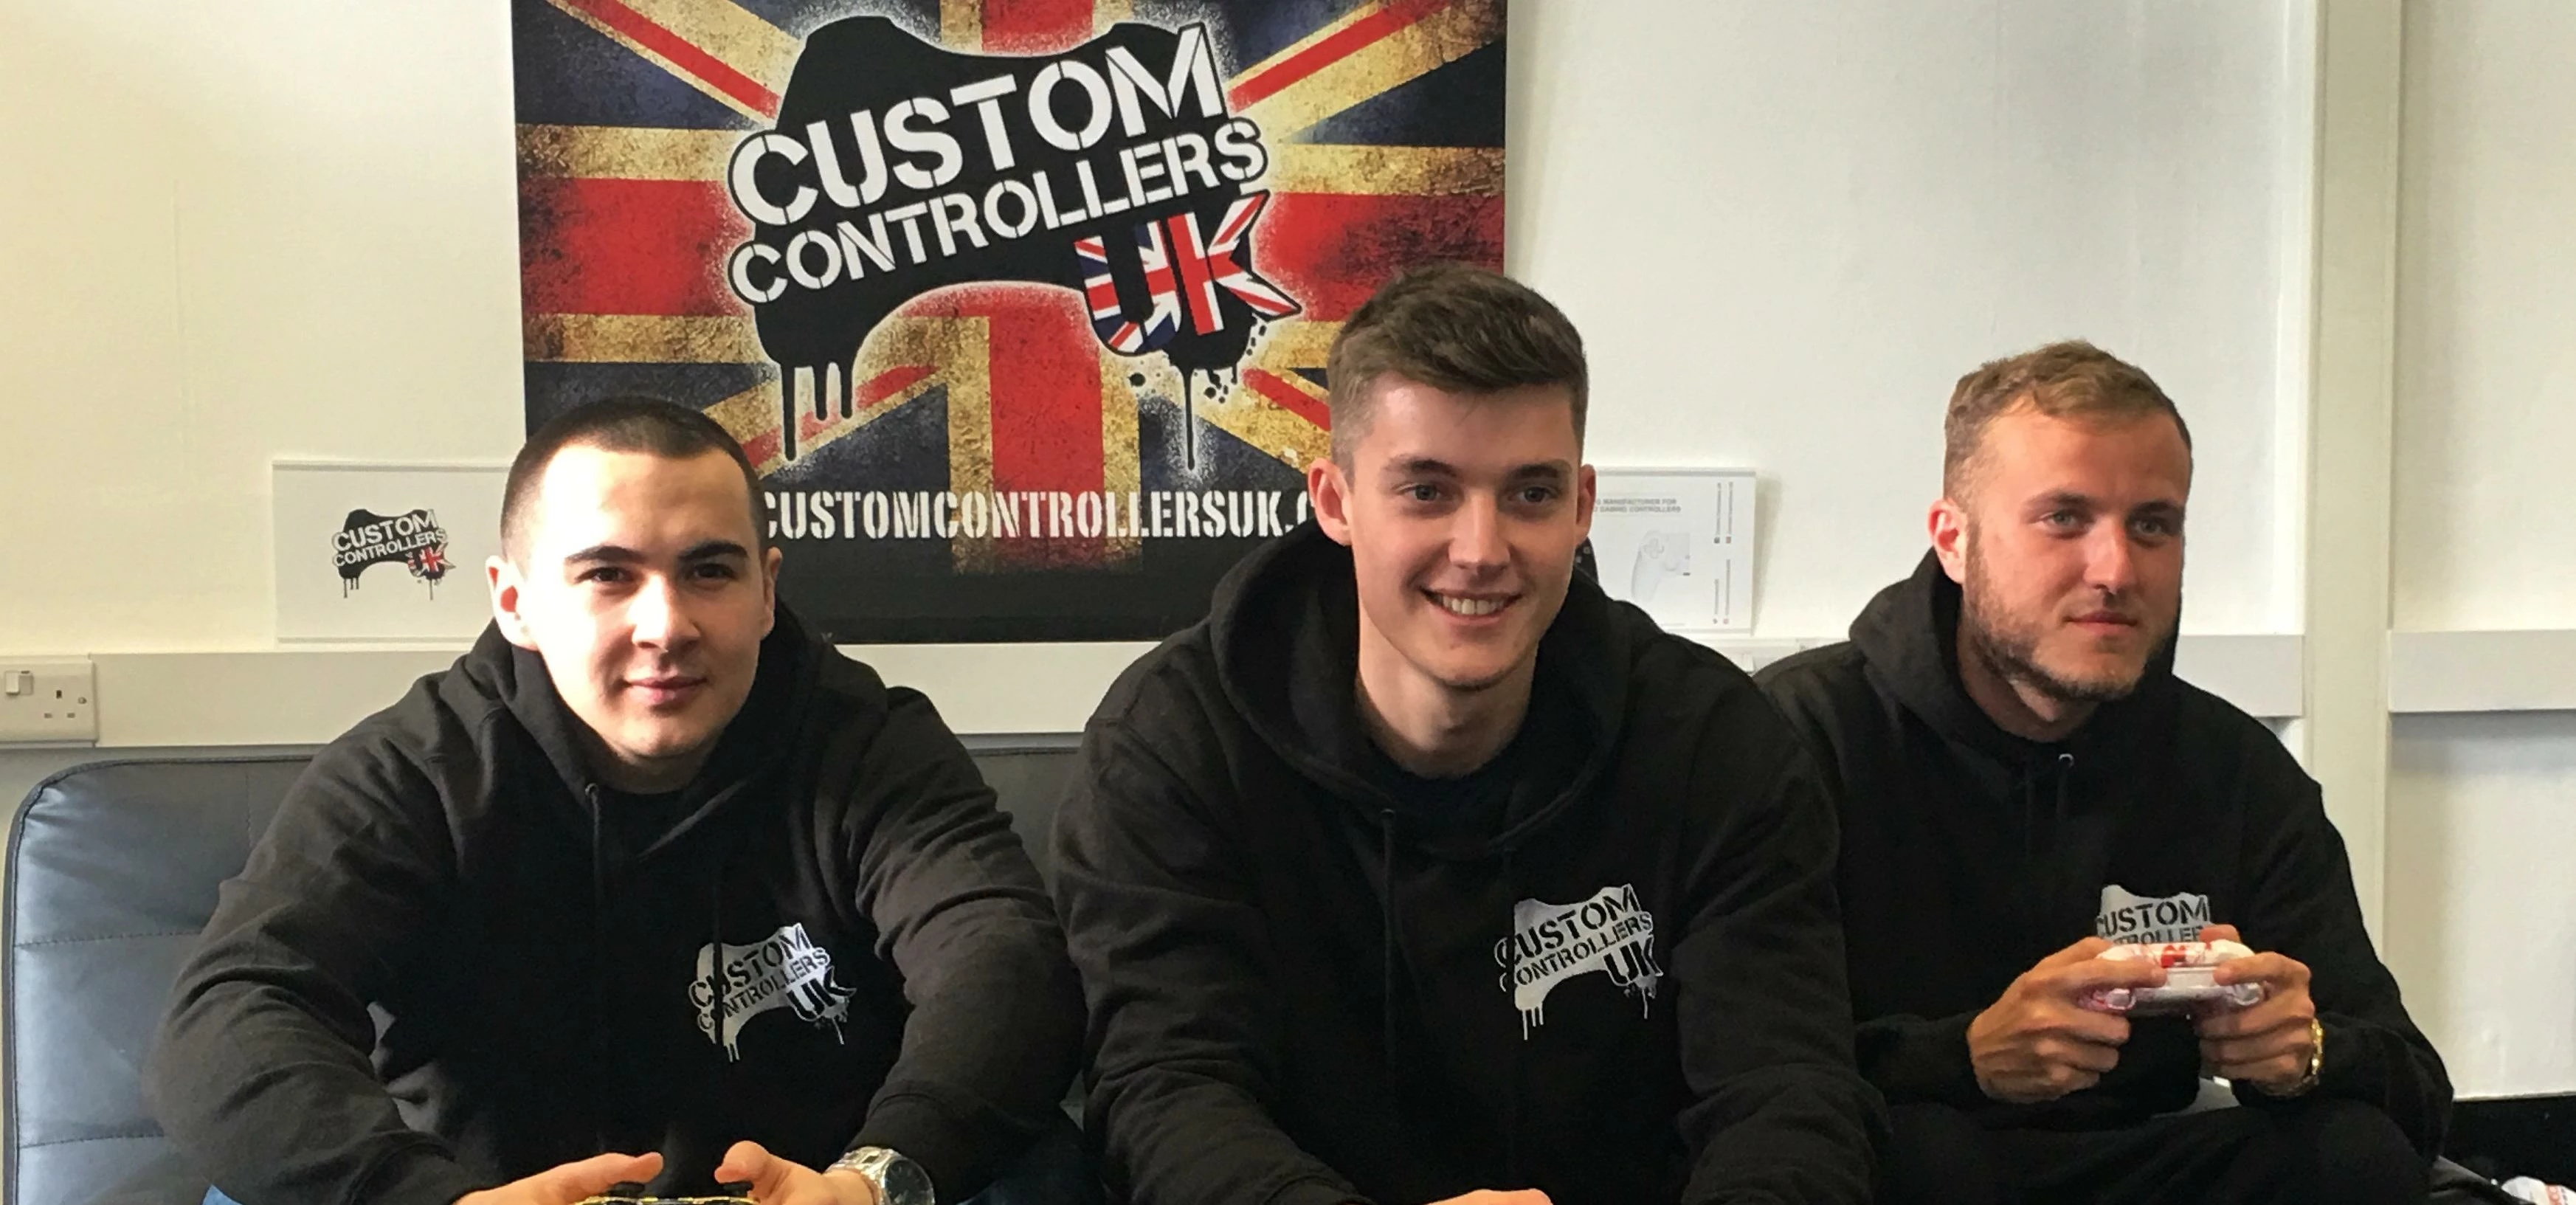 Ben Lawton started Custom Controllers when he was studying for a business management degree at Leeds